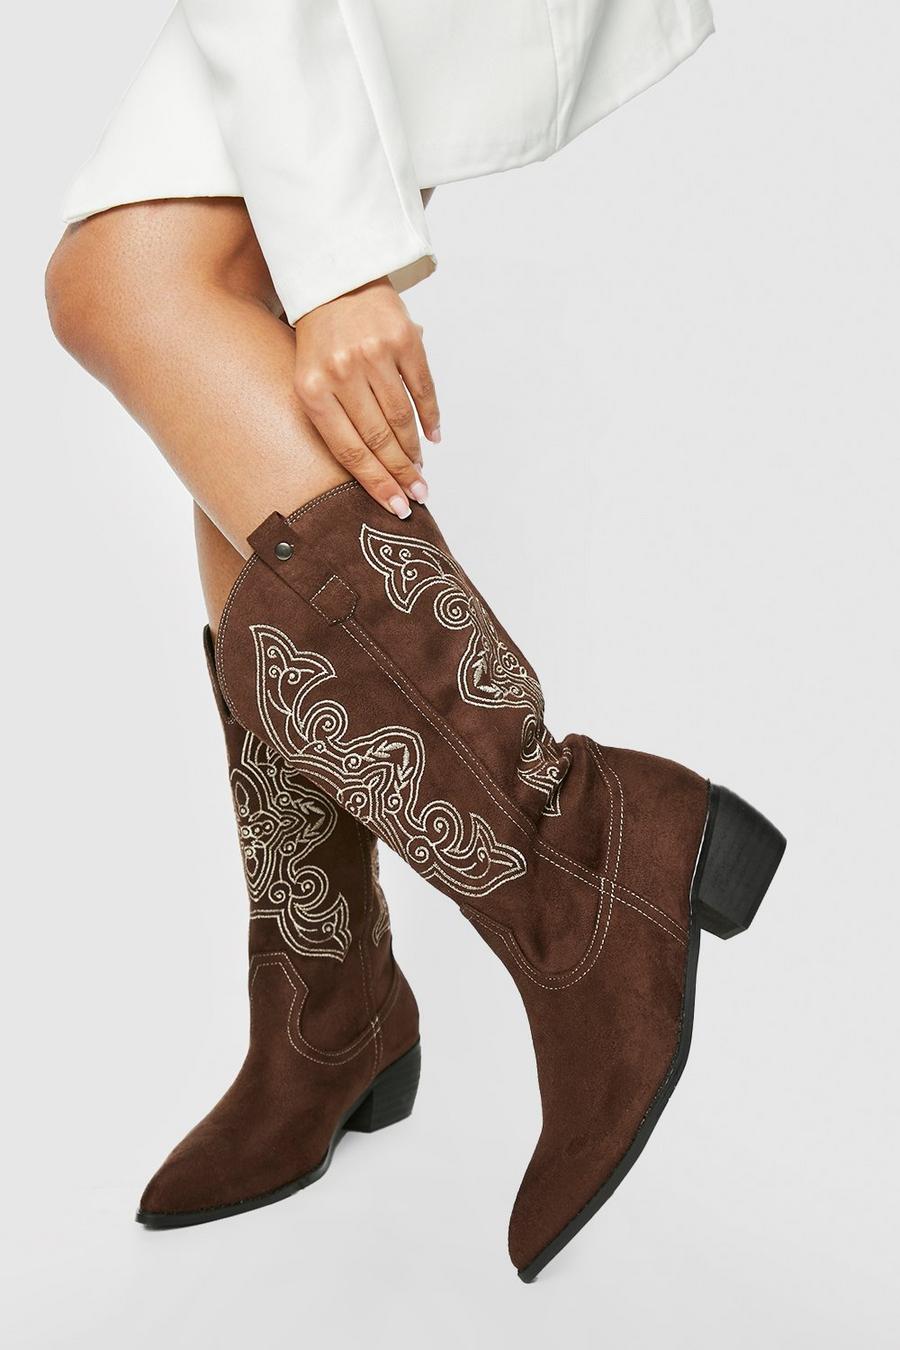 Chocolate brown Wide Width Contrast Embroidered Casual Cowboy Cowboy Boots